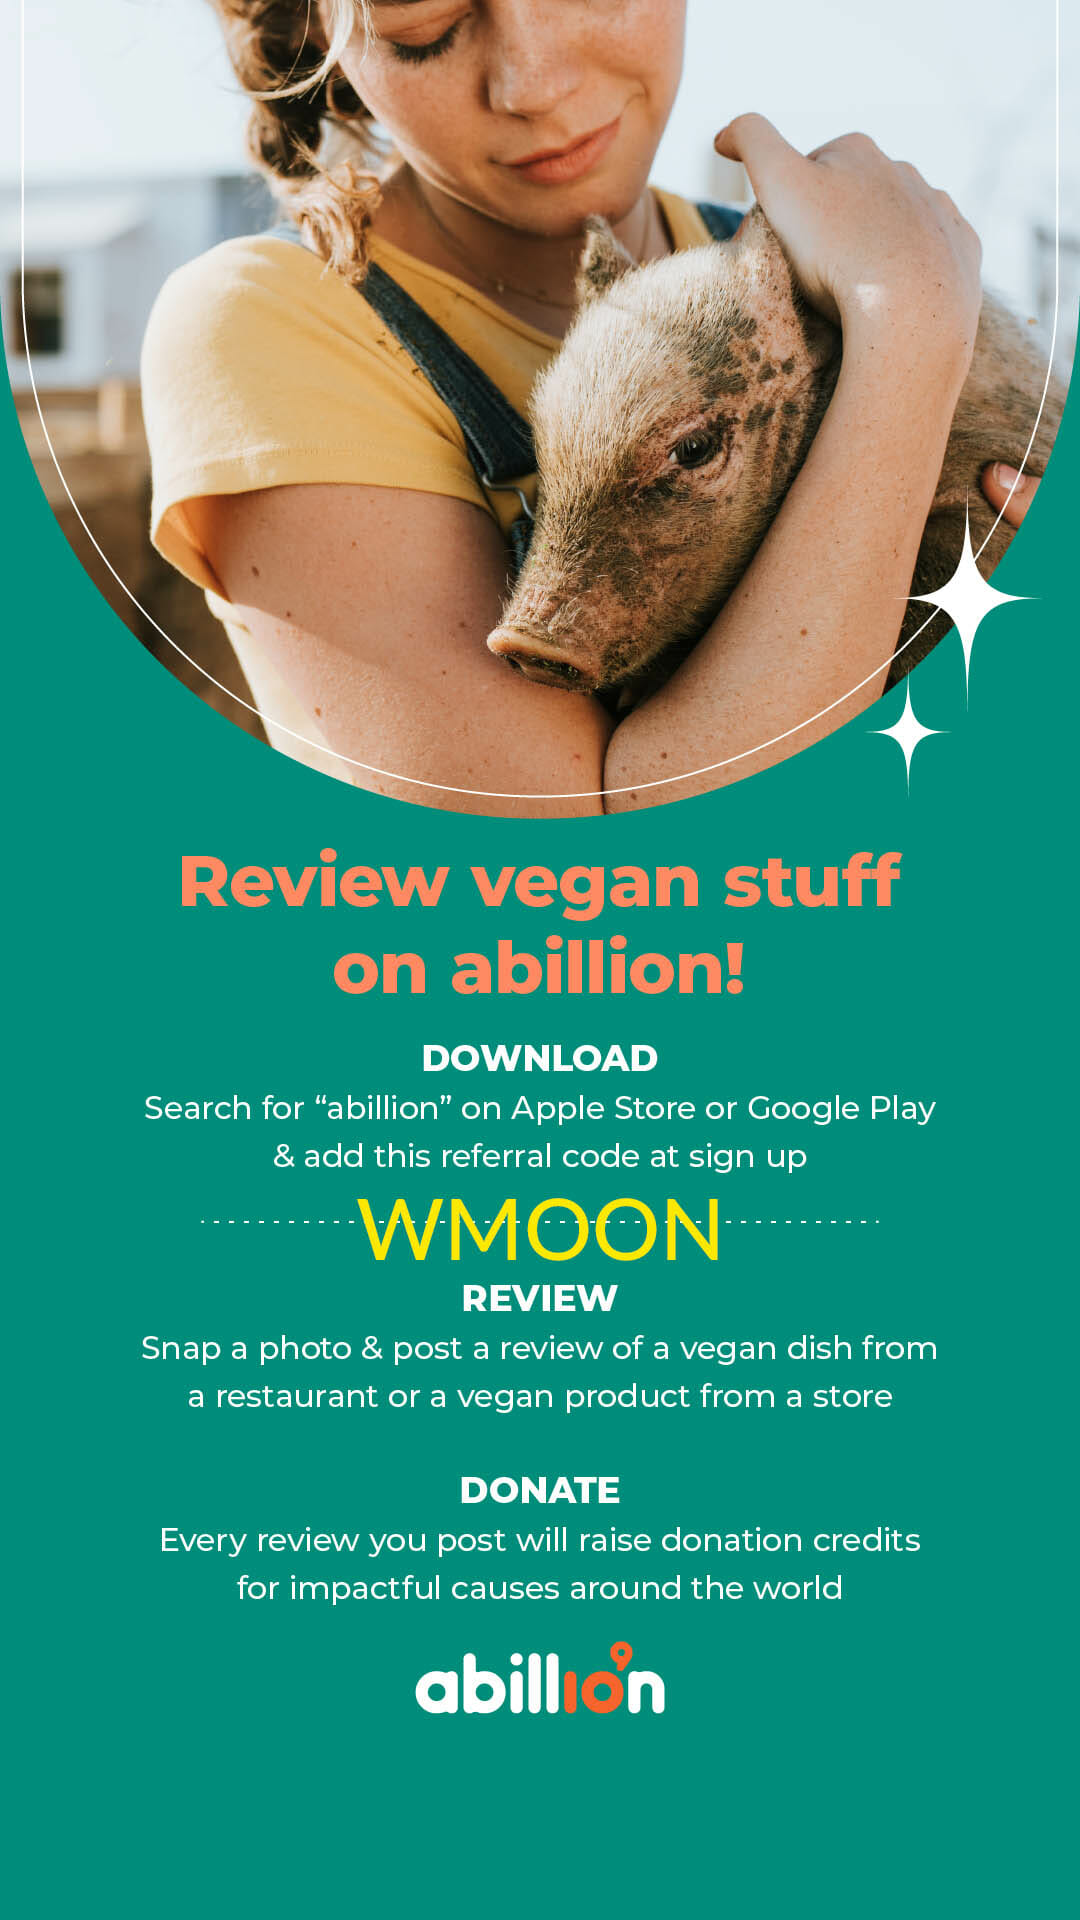 Girl holding pig. Text reads, "Review vegan stuff on abillion! Download, search for abillion on Apple Store of Google Play and add this referral code at sign up: WMOON.